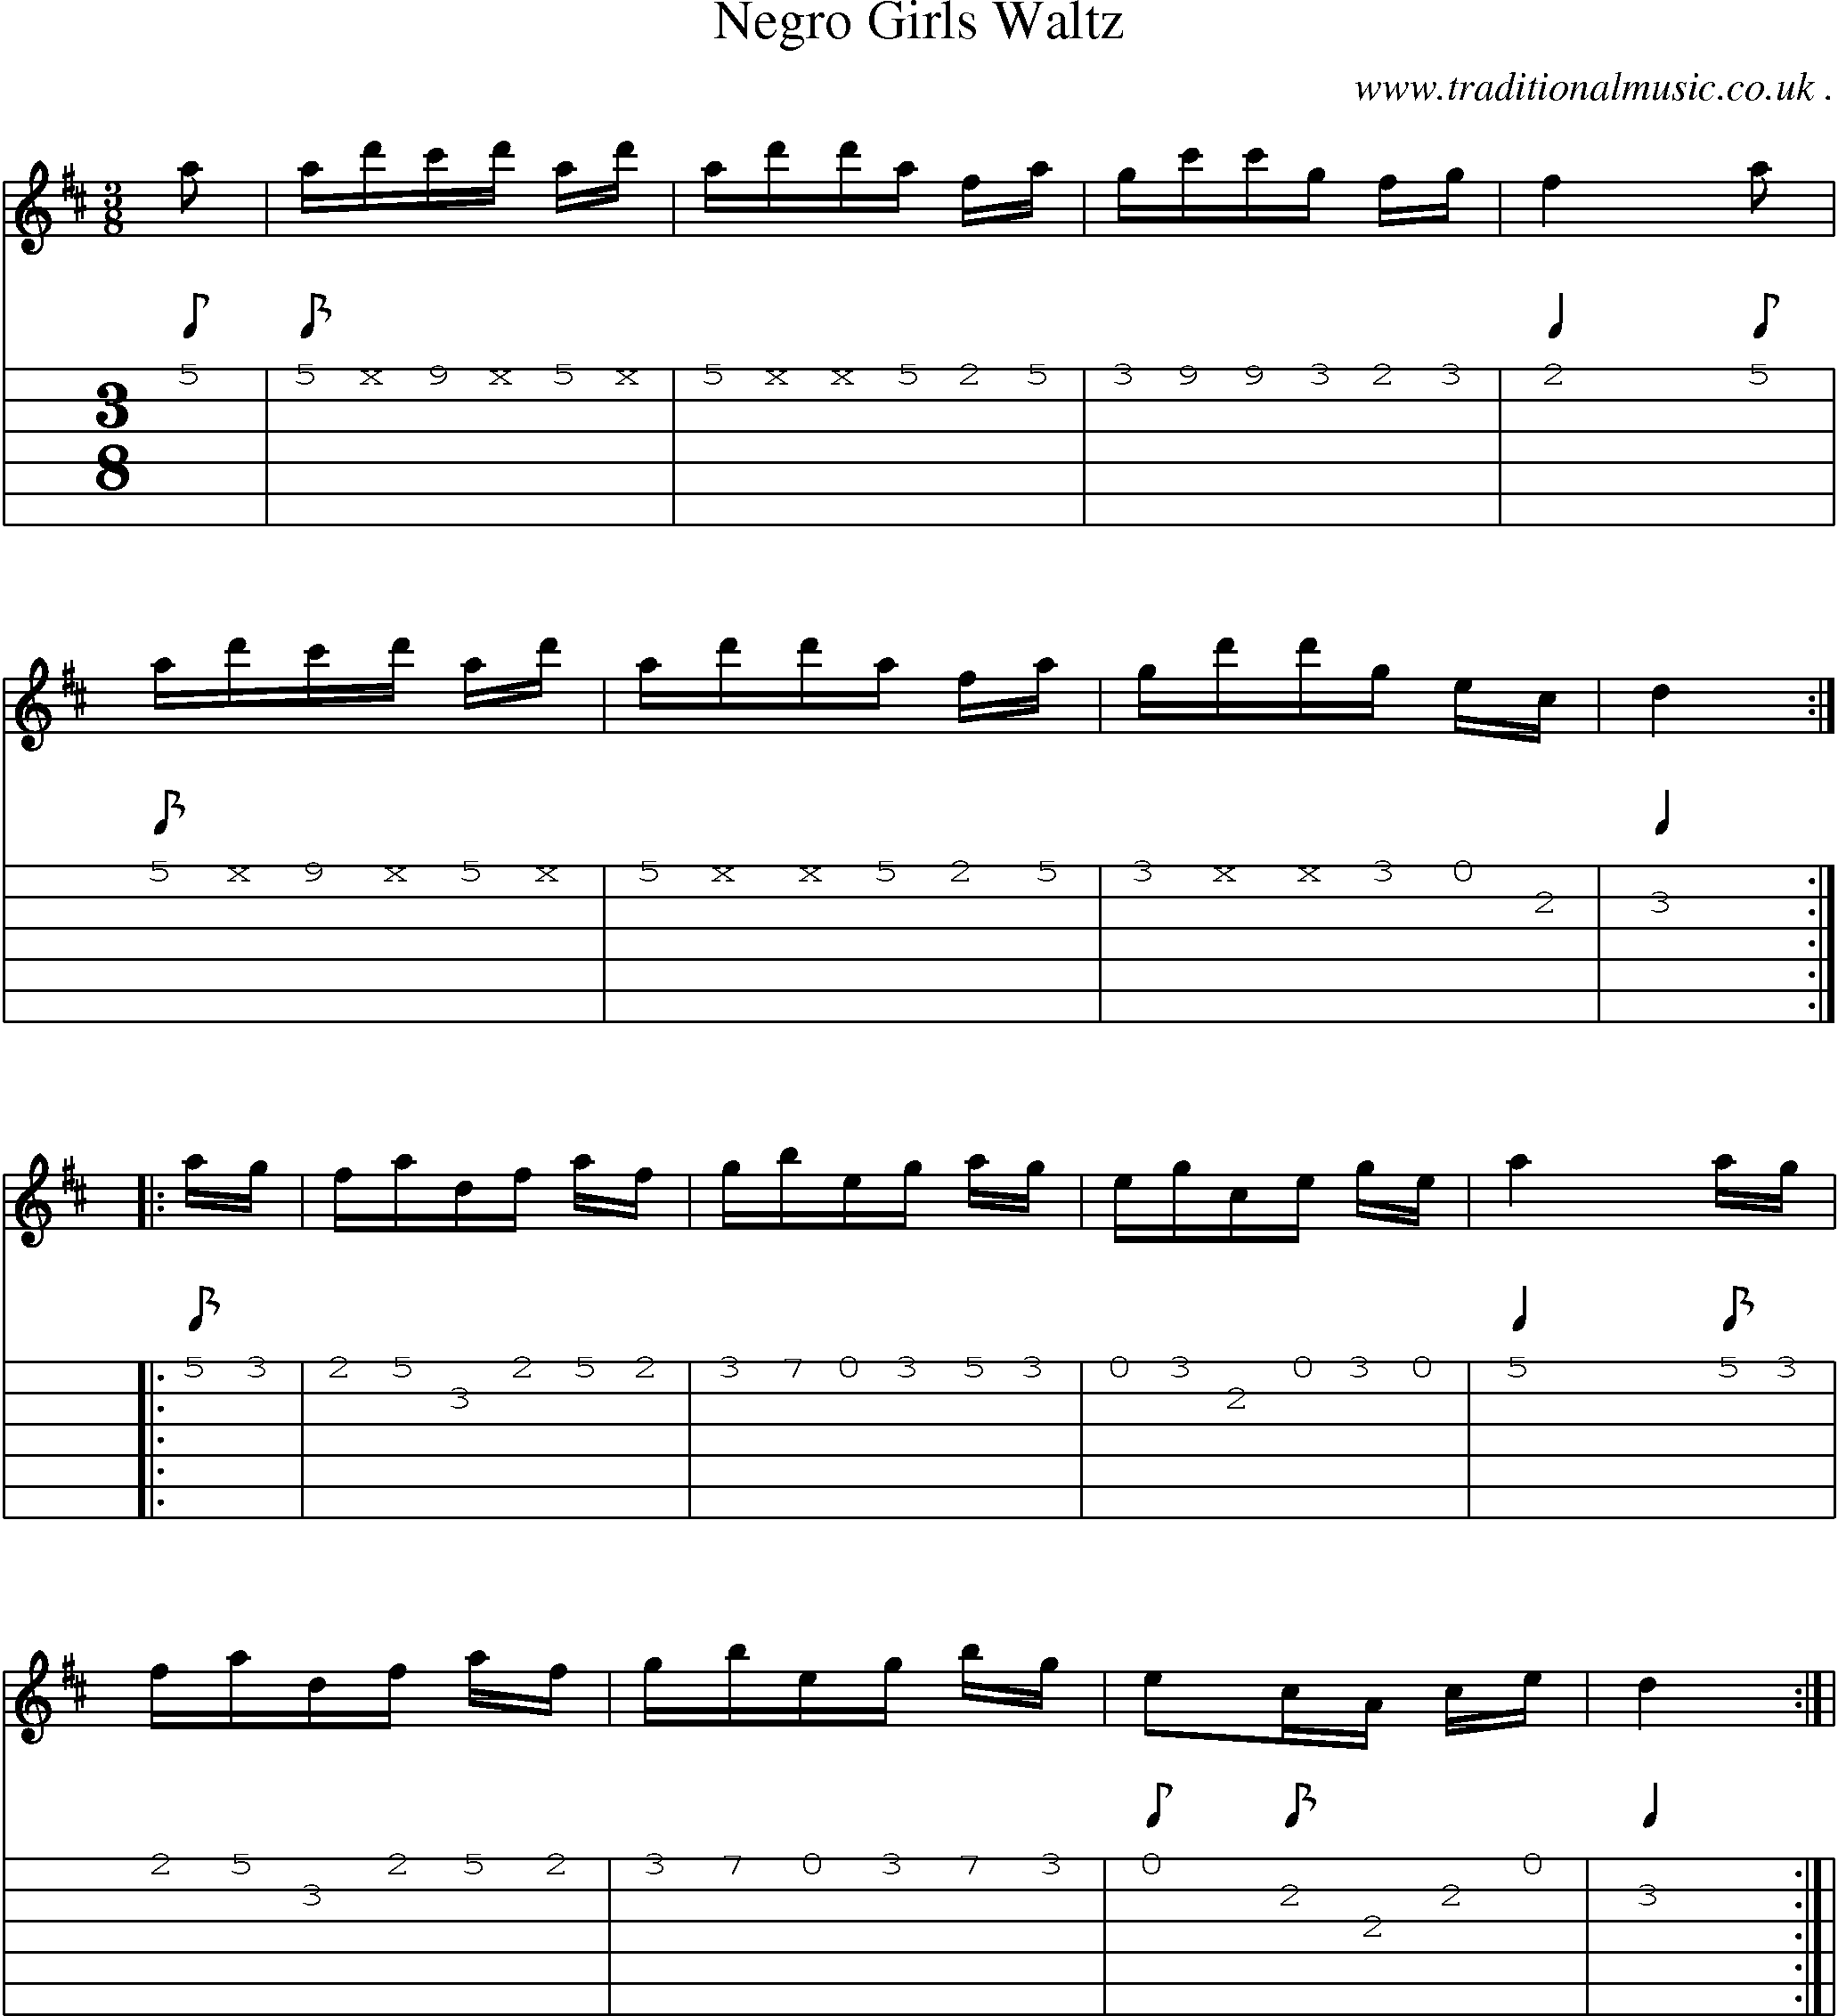 Sheet-Music and Guitar Tabs for Negro Girls Waltz